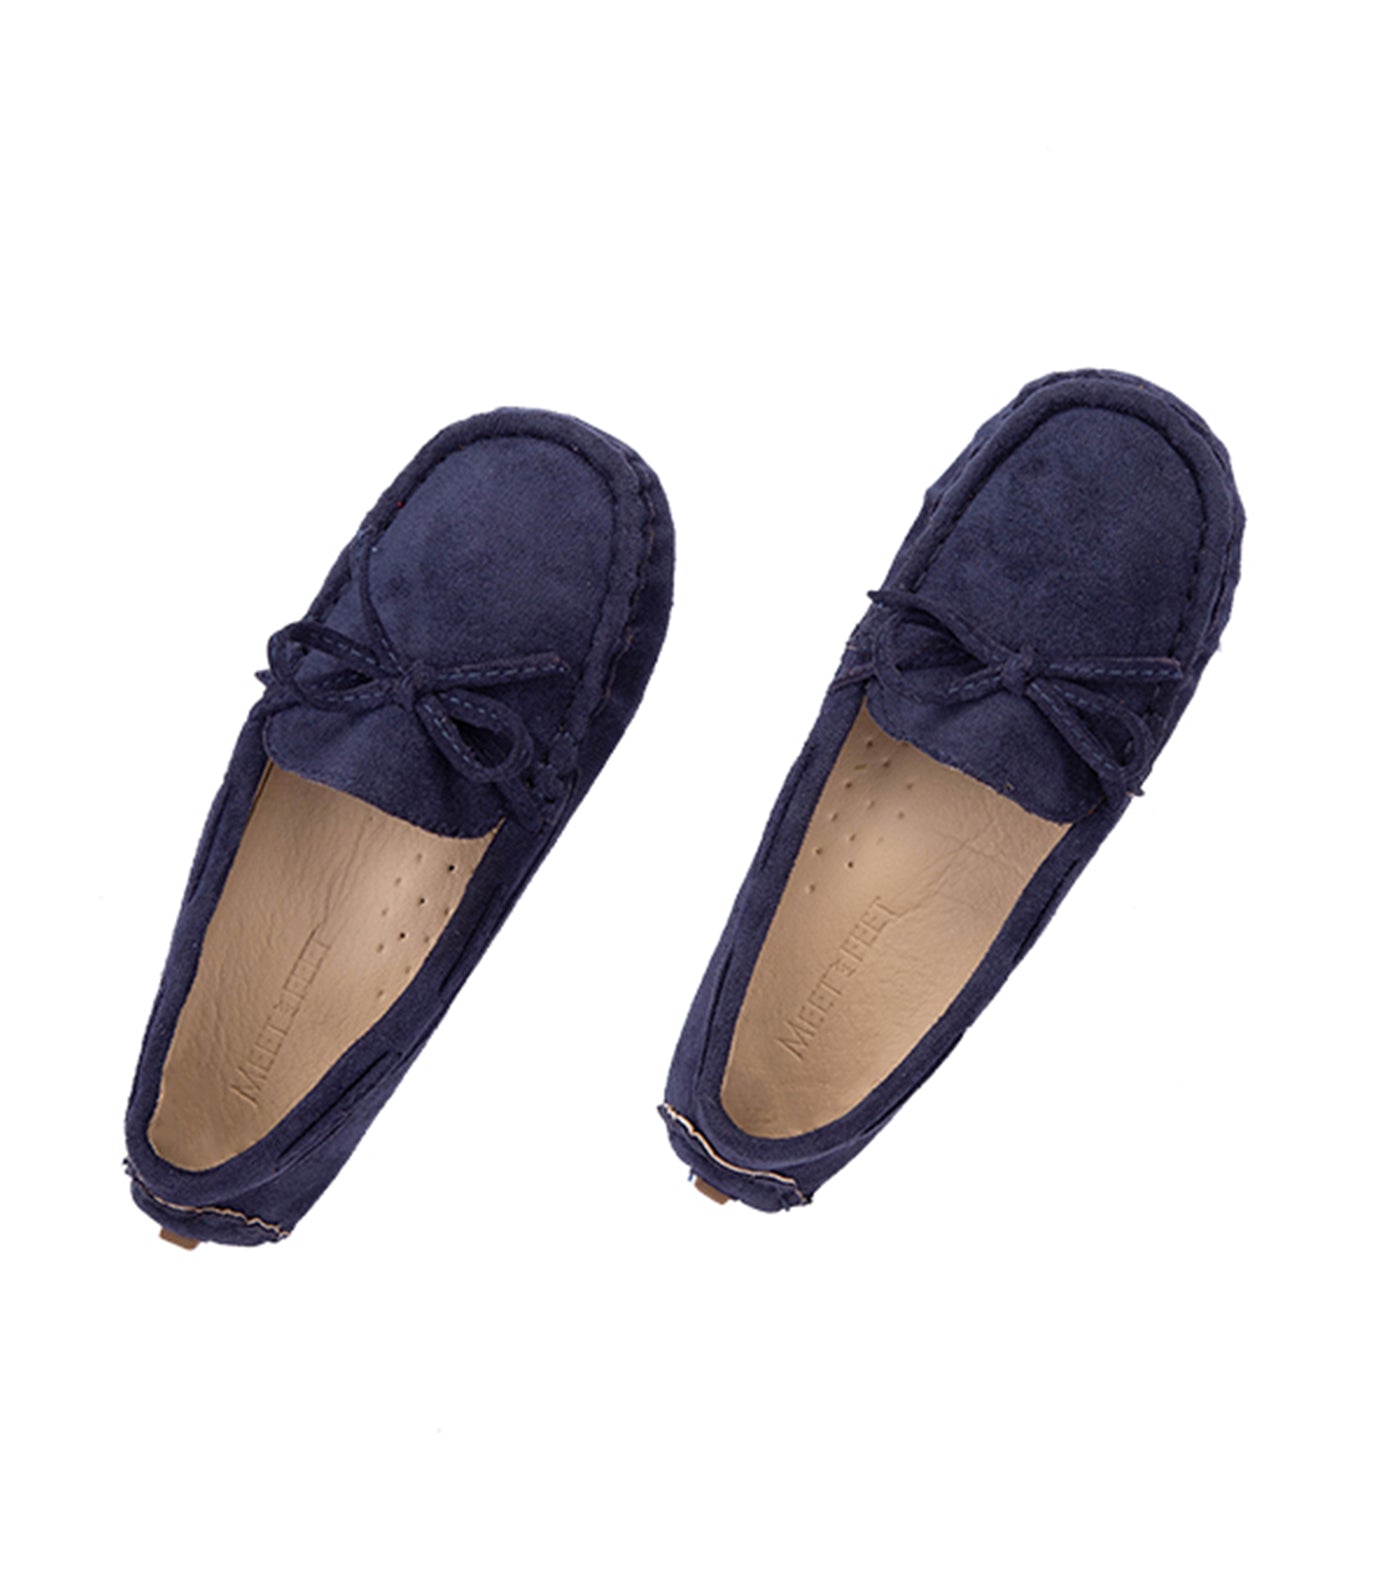 Safi Loafers for Boys - Navy Blue